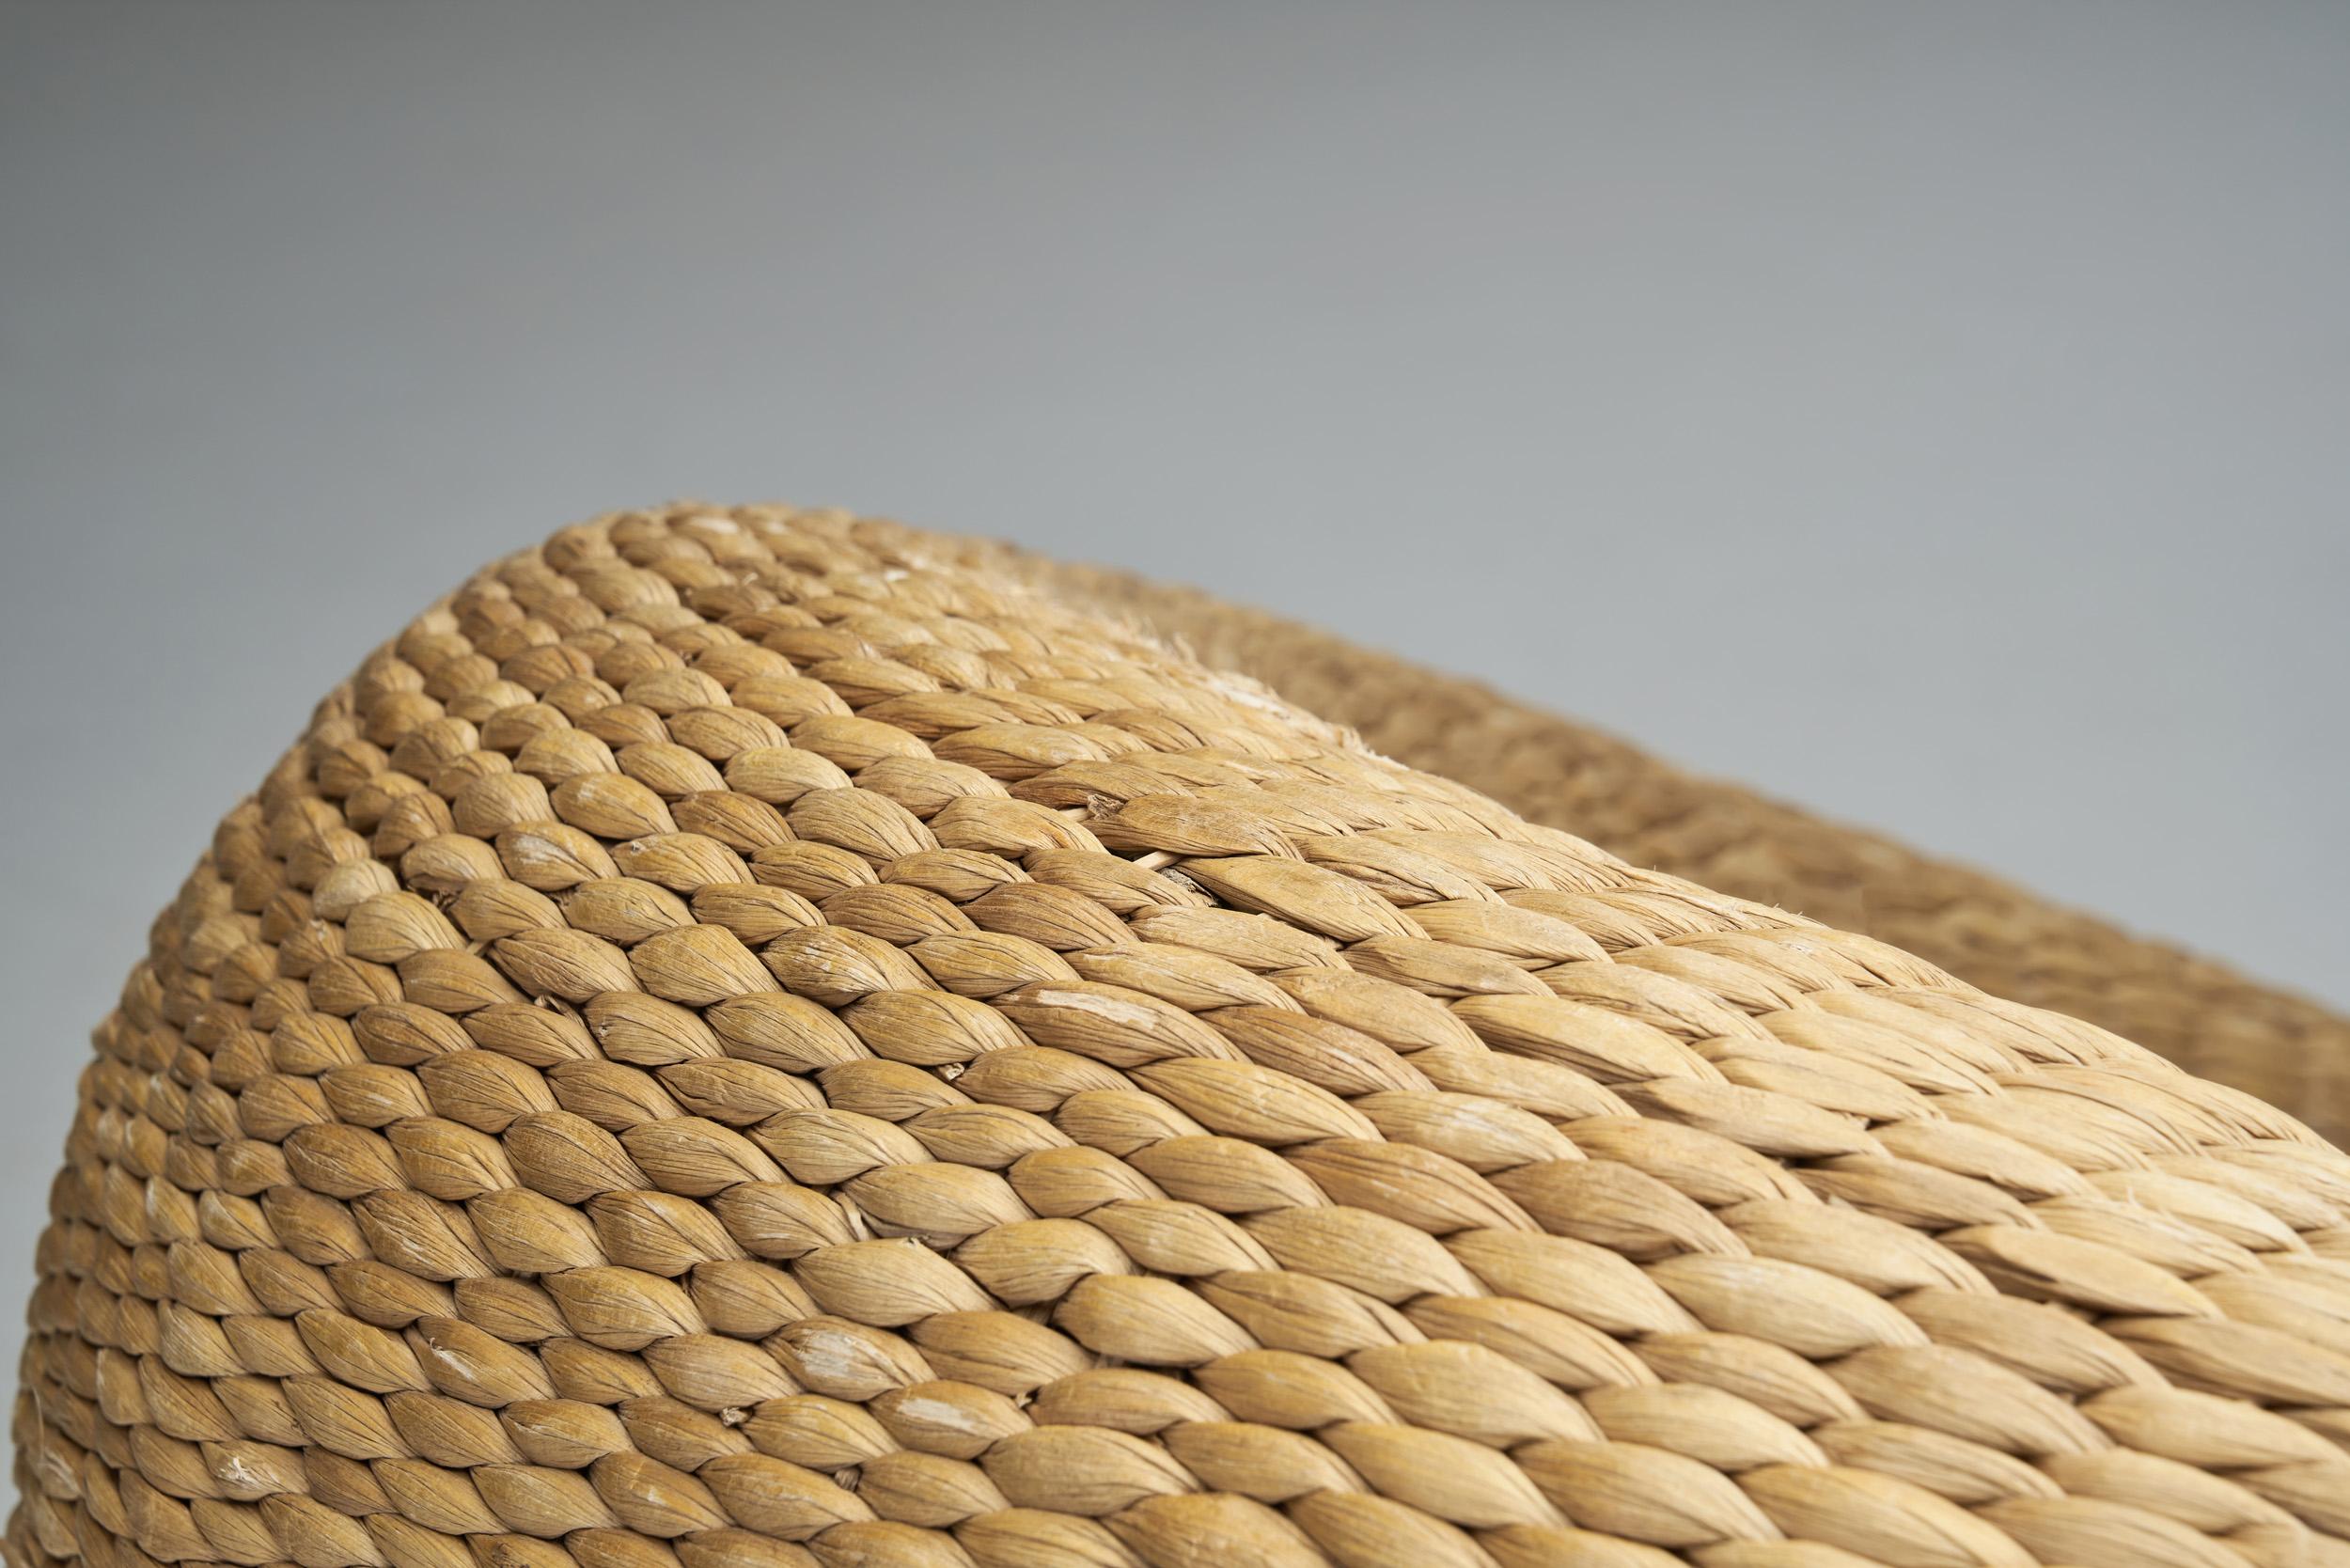 Woven Wicker Bird's Nest Chair in the Manner of Isamu Kenmochi, Europe, ca 1960s For Sale 2